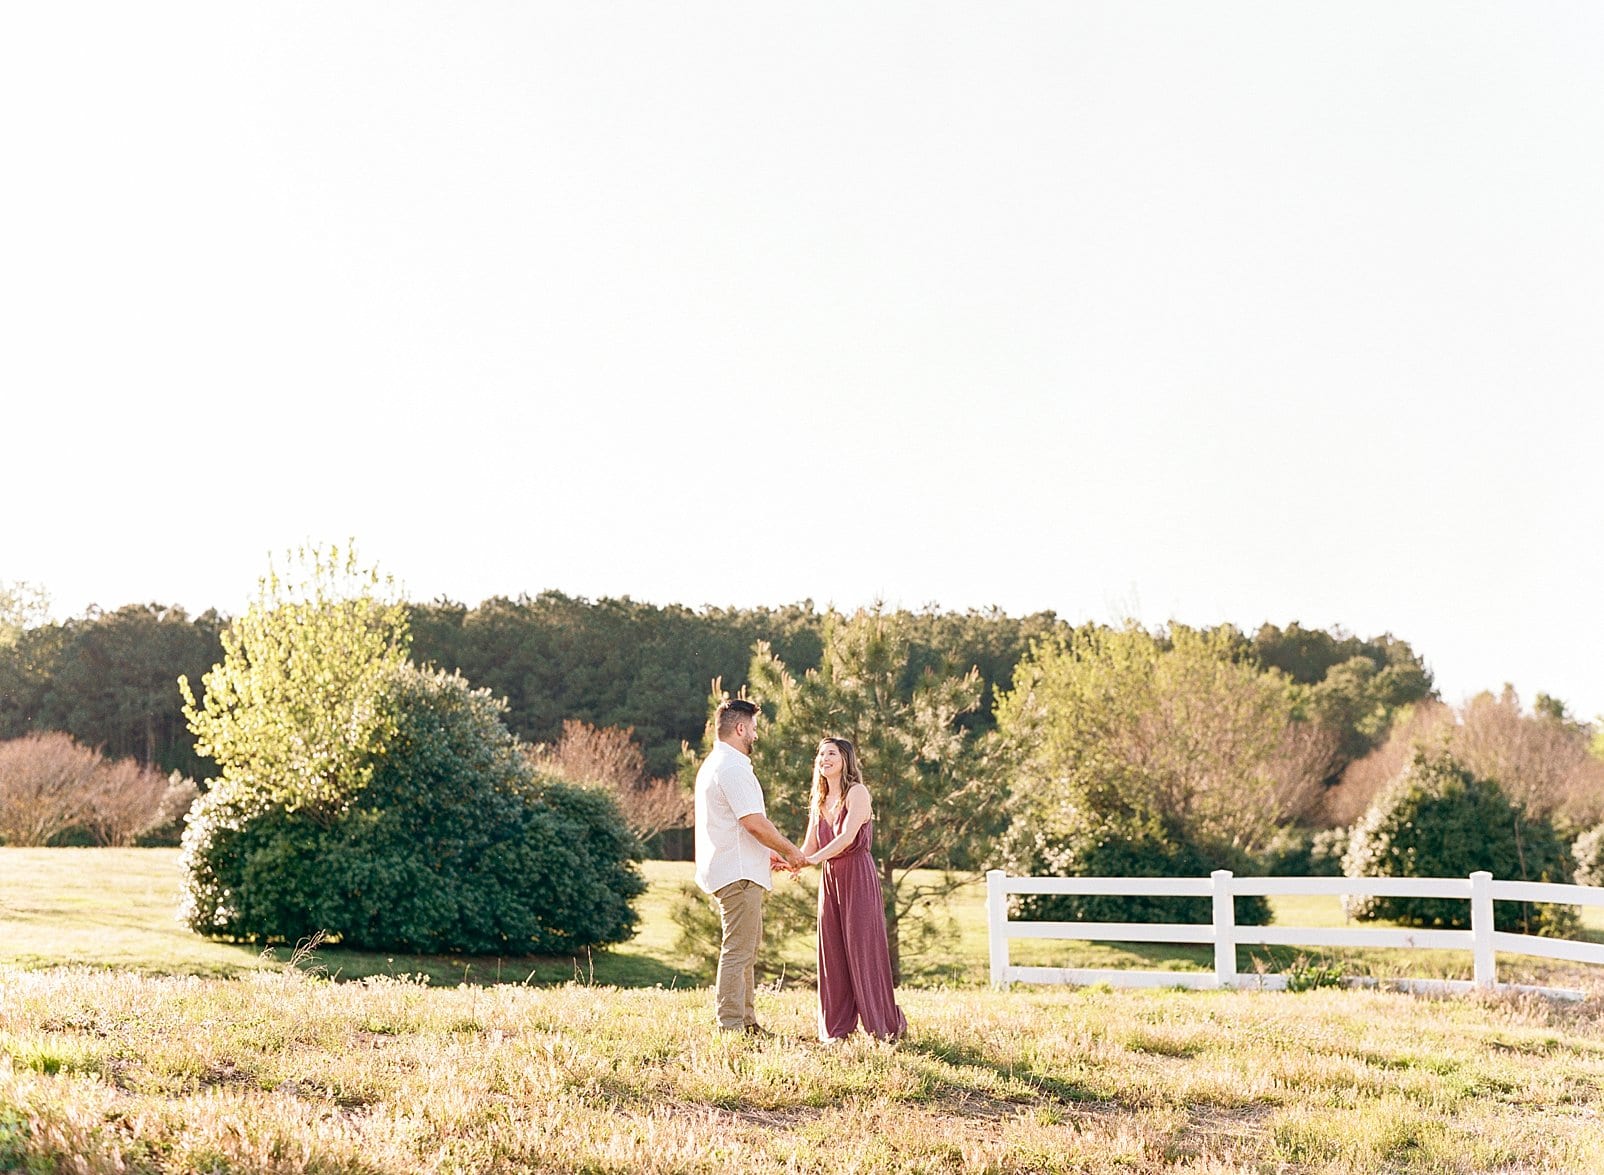 Raleigh, NC engagement shoot with couple holding hands in a field with a white fence behind them photo